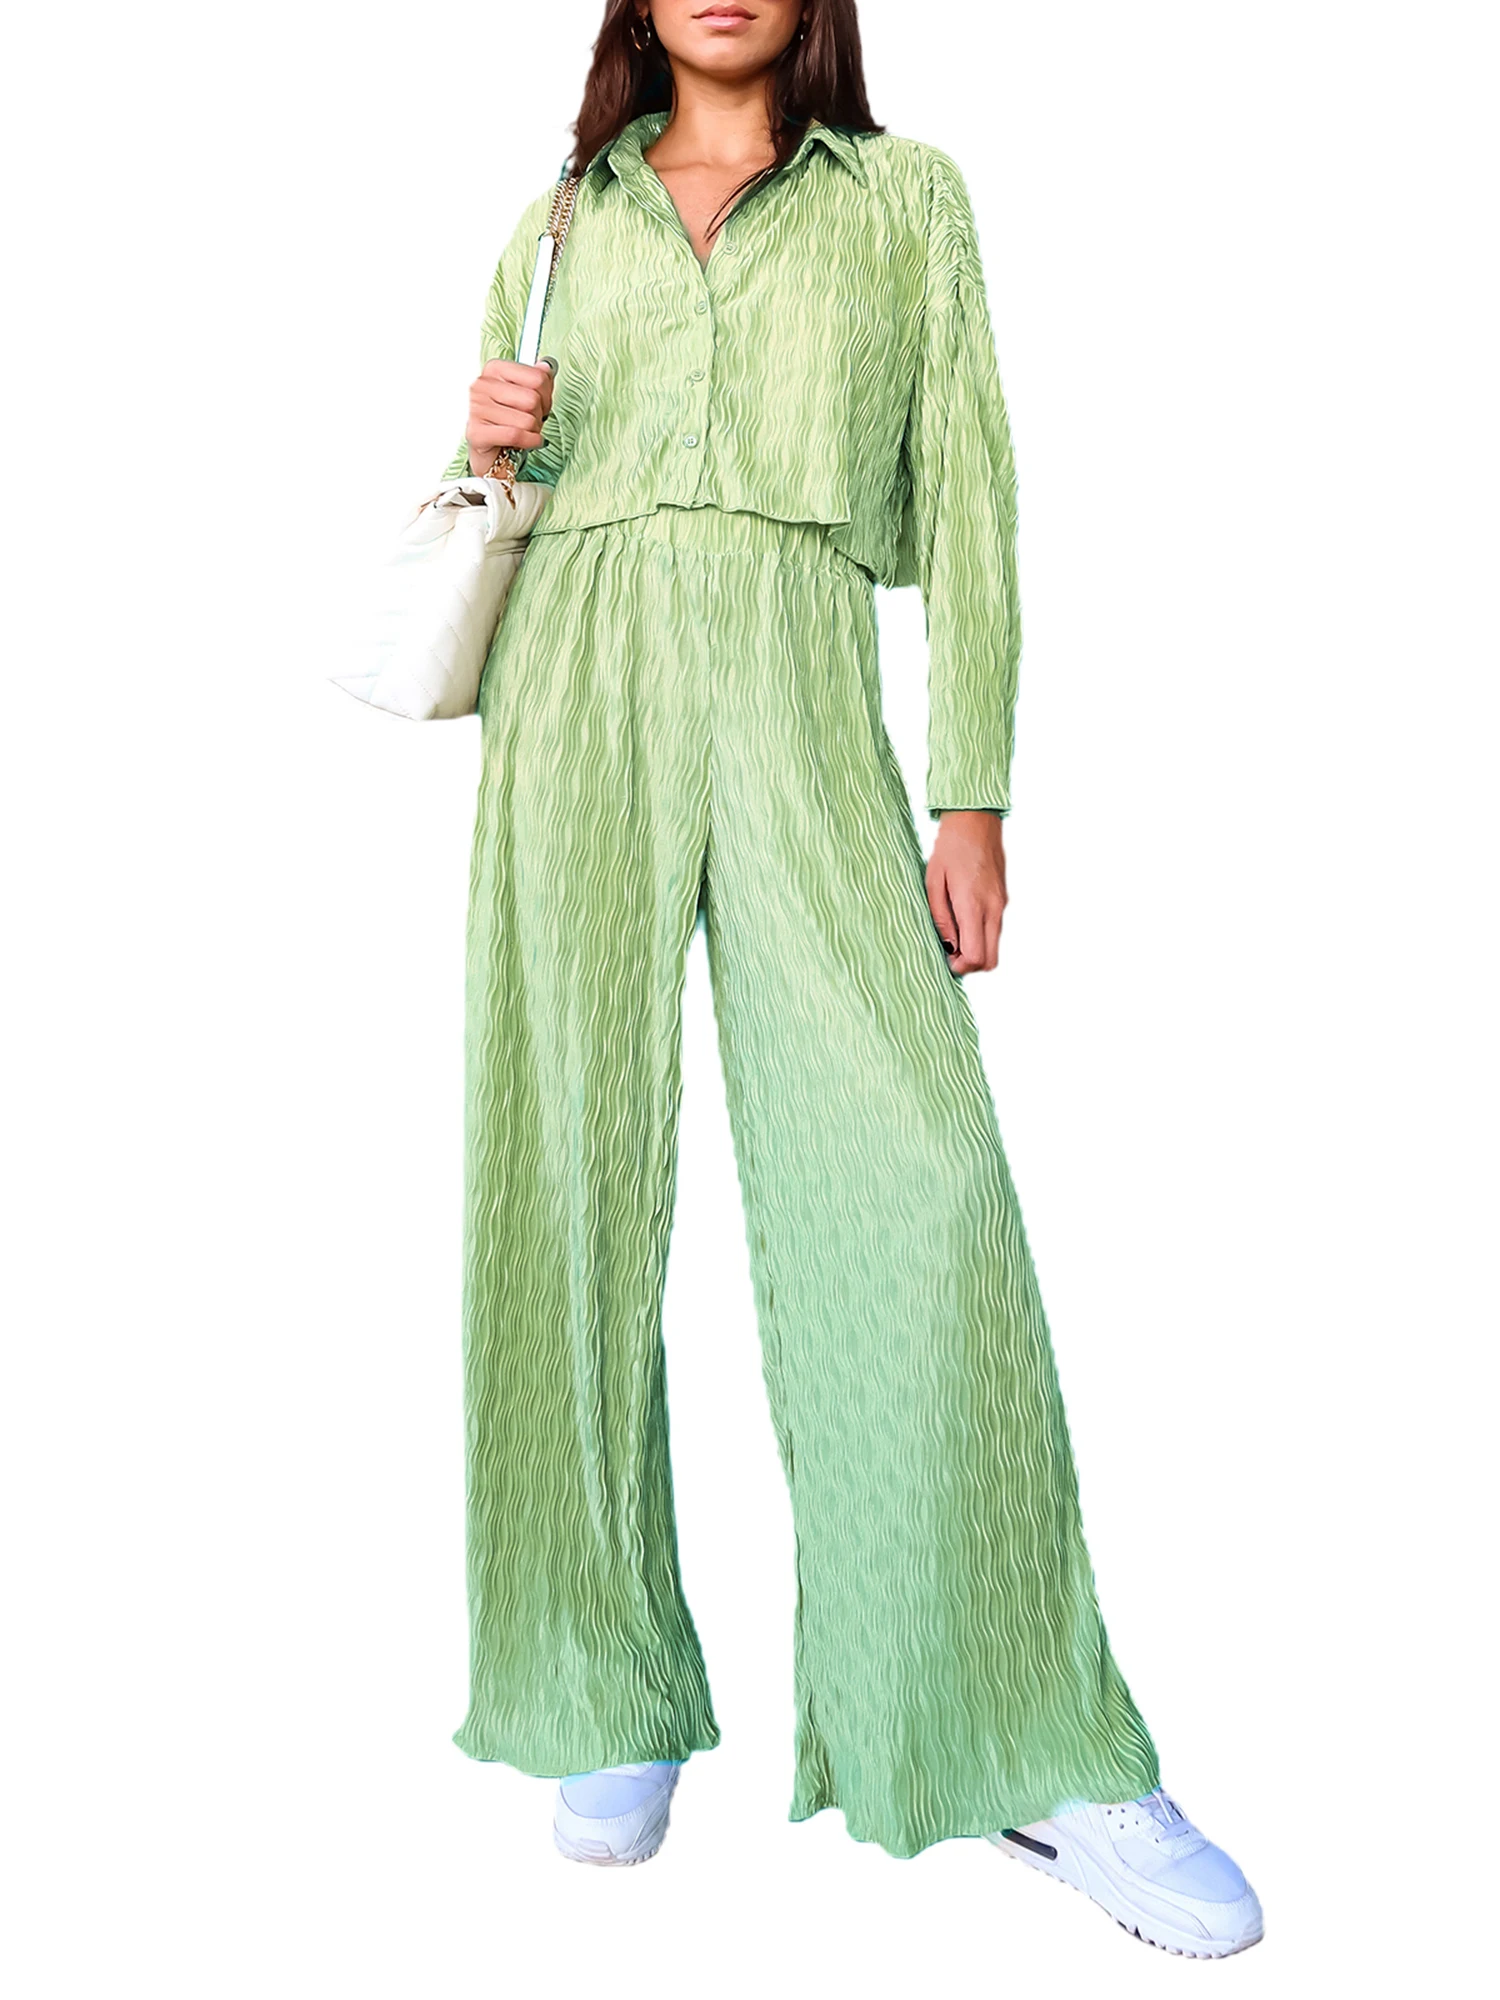 Luxurious Silk Satin Pajama Set with Feather Trim for Women - Elegant Button Down Sleepwear and Loungewear for Brides and Beyond